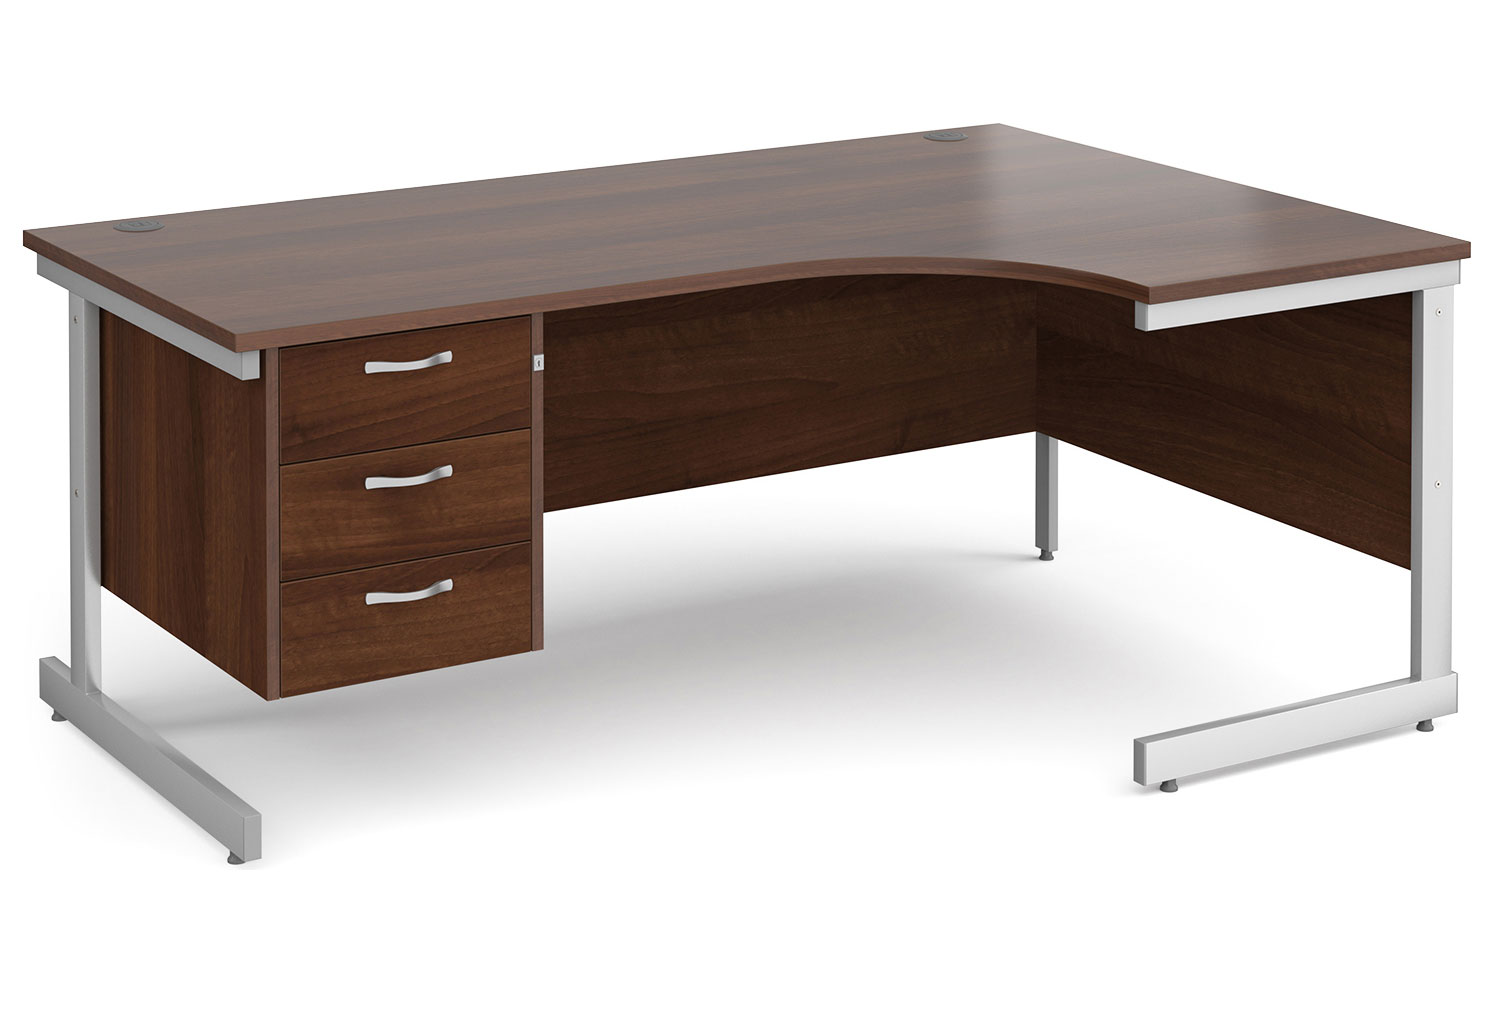 All Walnut C-Leg Right Hand Ergo Office Desk 3 Drawers, 180wx120/80dx73h (cm), Express Delivery